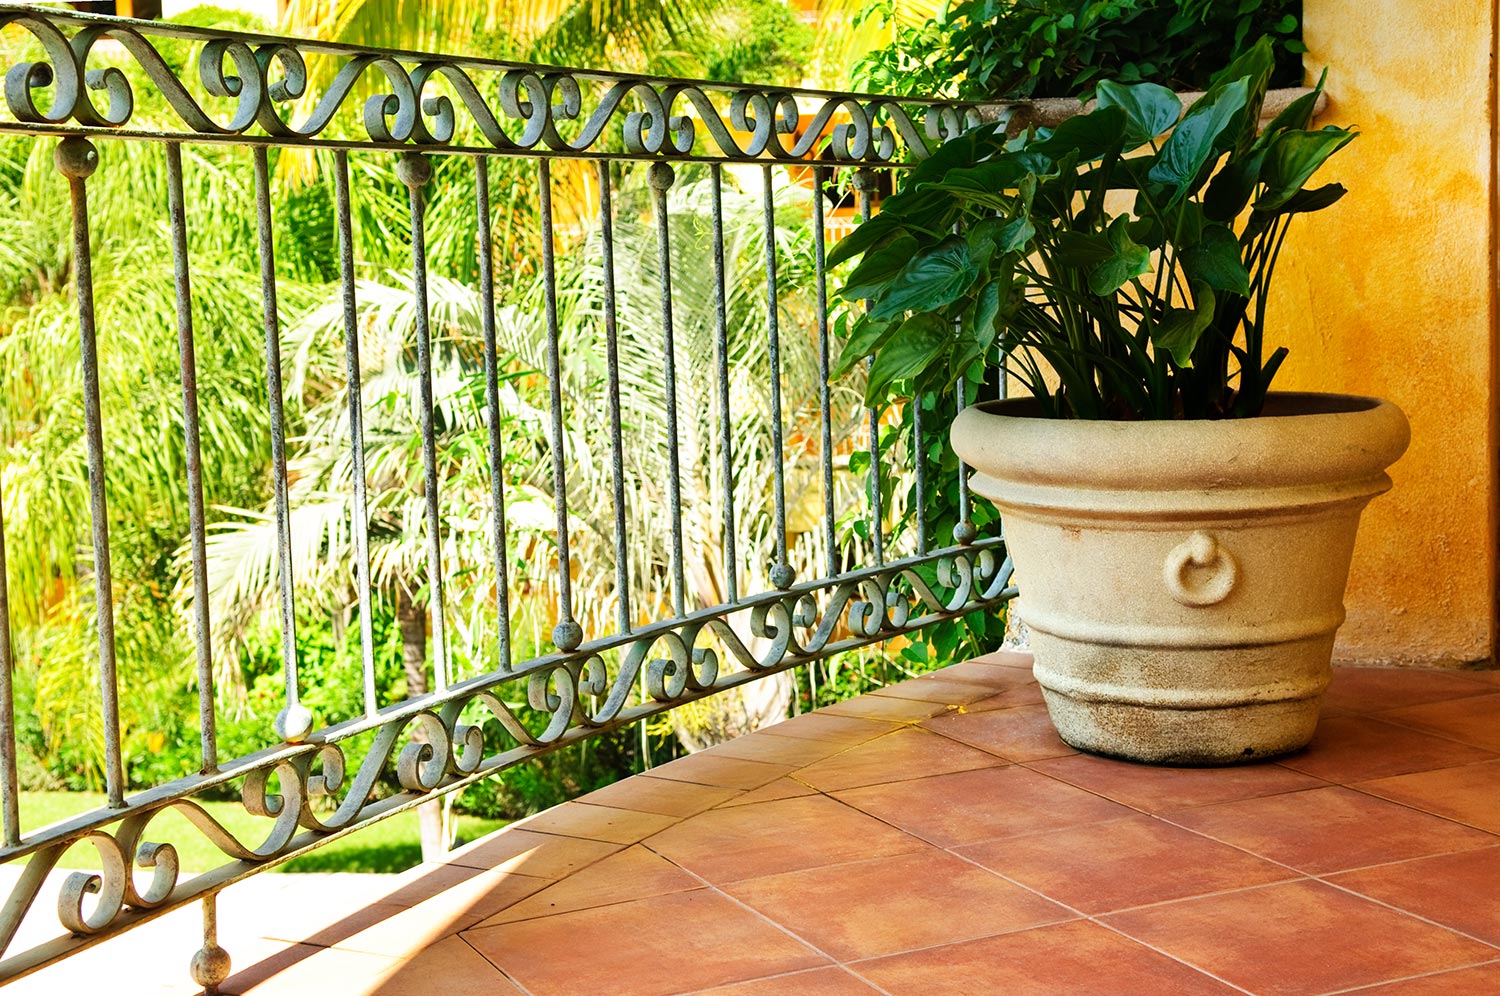 Tiled Mexican balcony with potted plant near railing